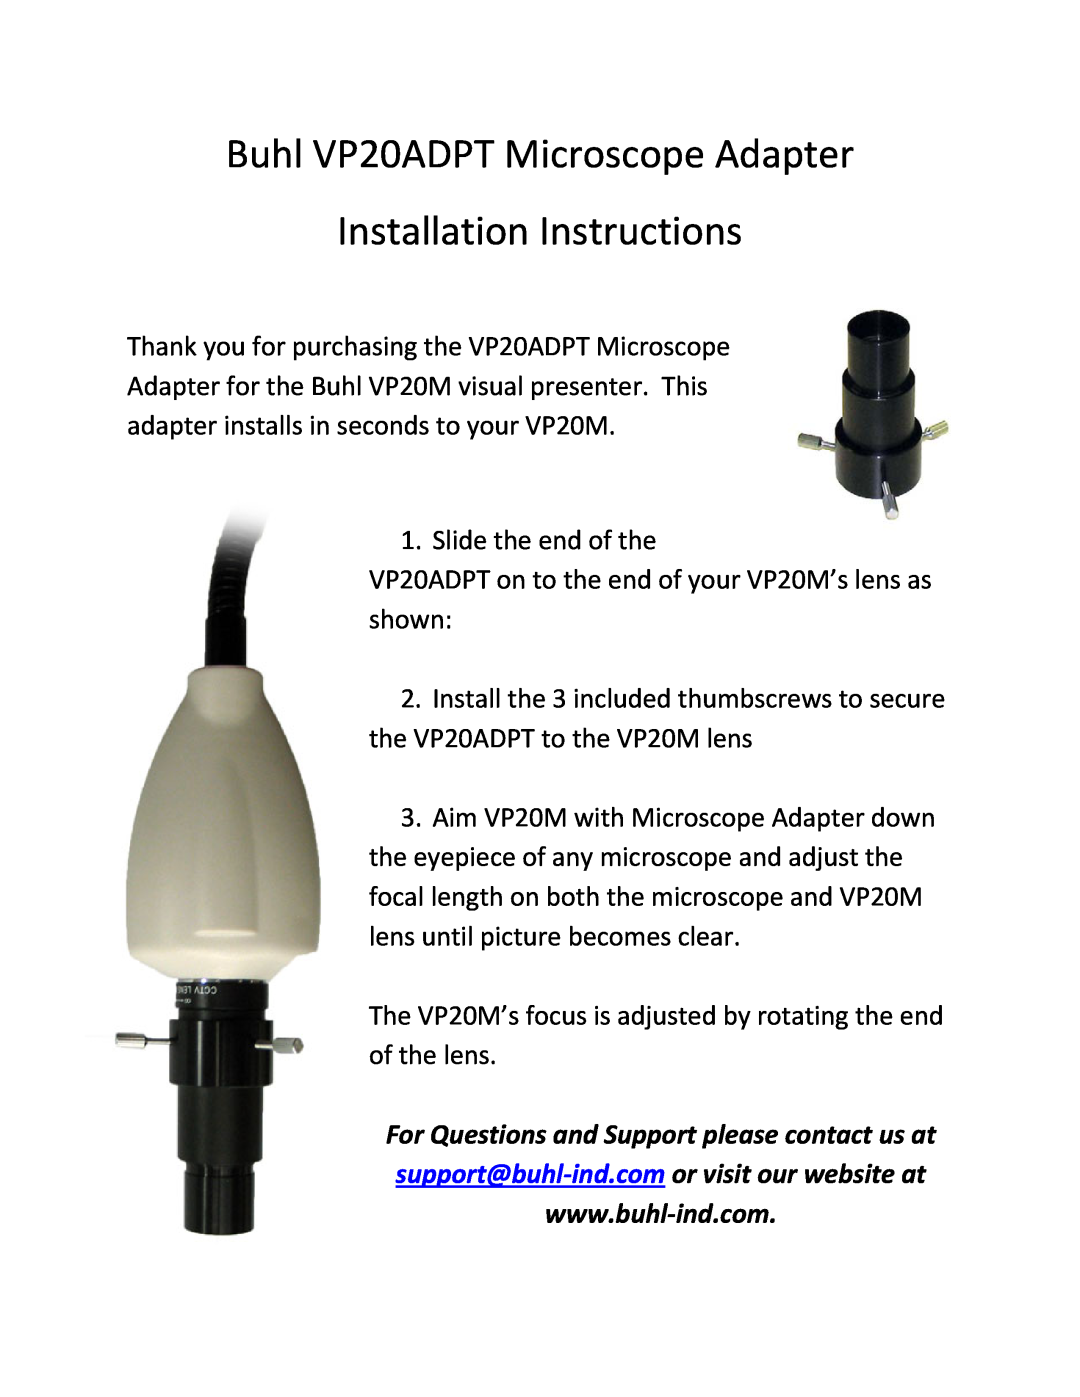 Buhl manual Buhl VP20ADPT Microscope Adapter Installation Instructions, For Questions and Support please contact us at 